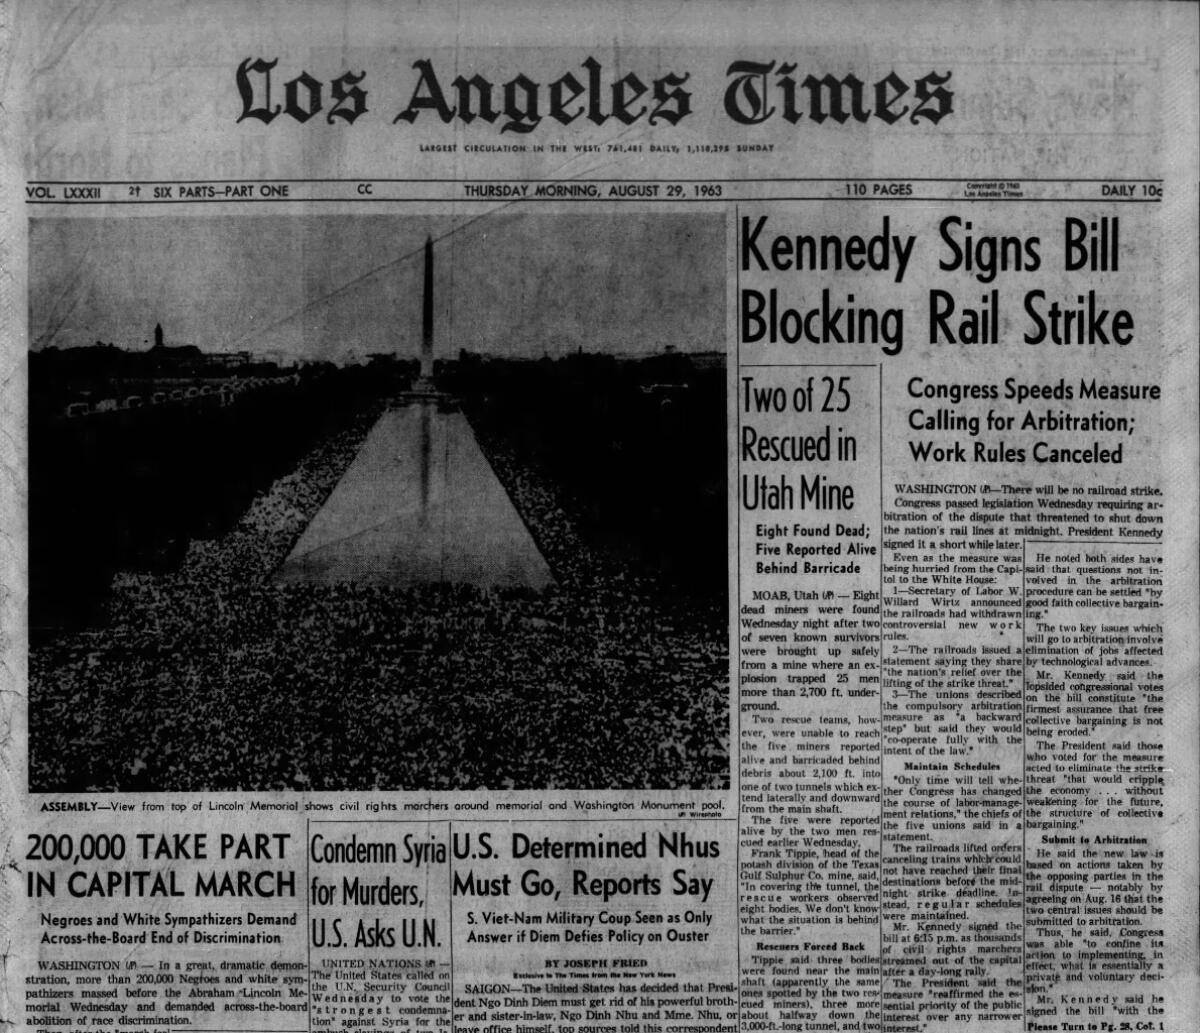 The front page of the Aug. 29, 1963, Los Angeles Times